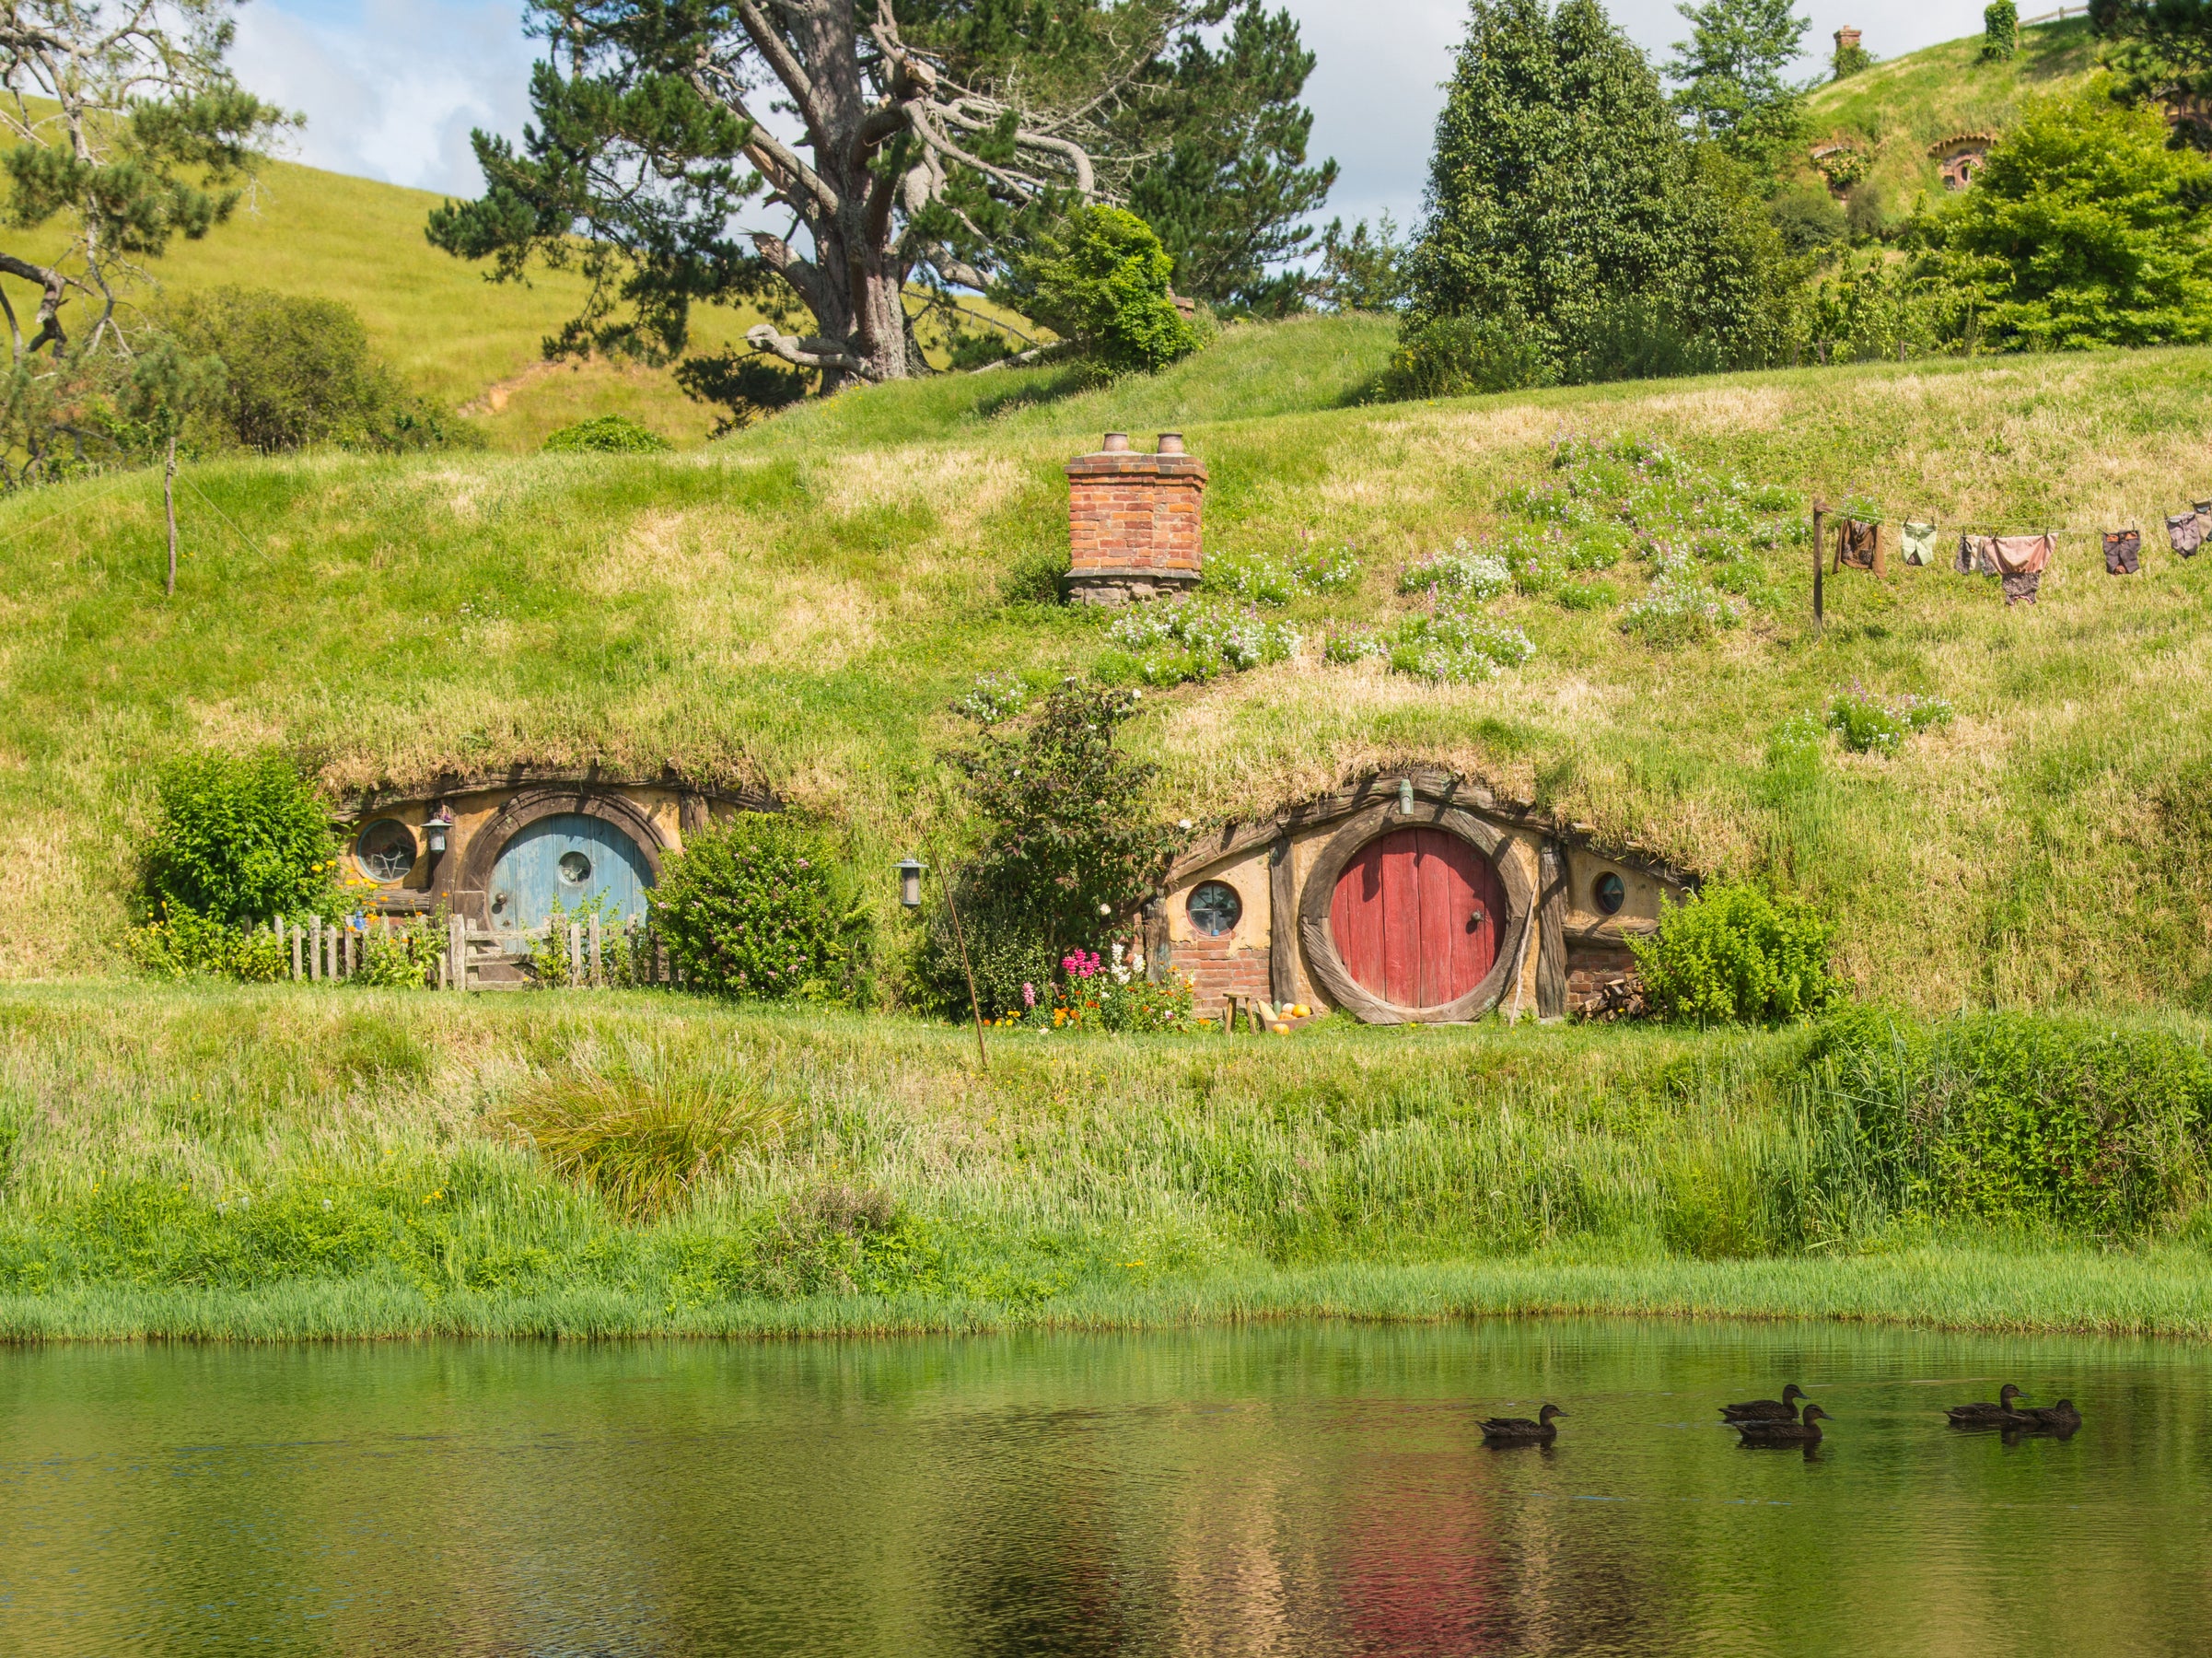 The animal probably didn’t live in hobbit holes like these at a filmset in New Zealand